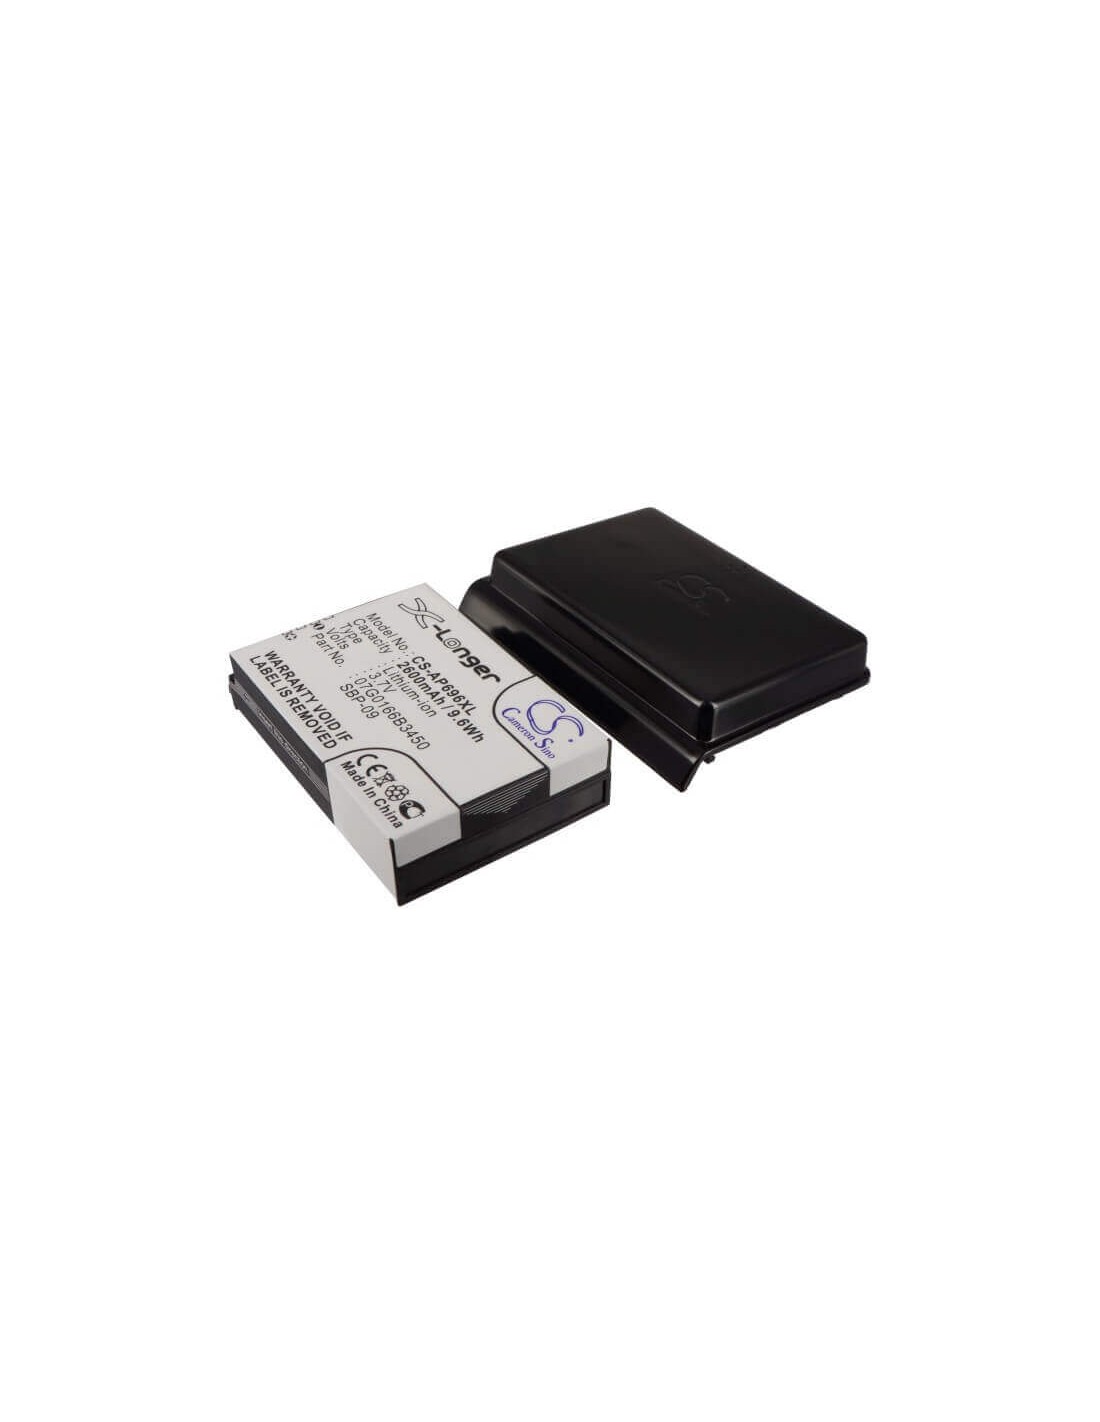 Battery for Asus Mypal A686, Mypal A696, Mypal A626 3.7V, 2600mAh - 9.62Wh